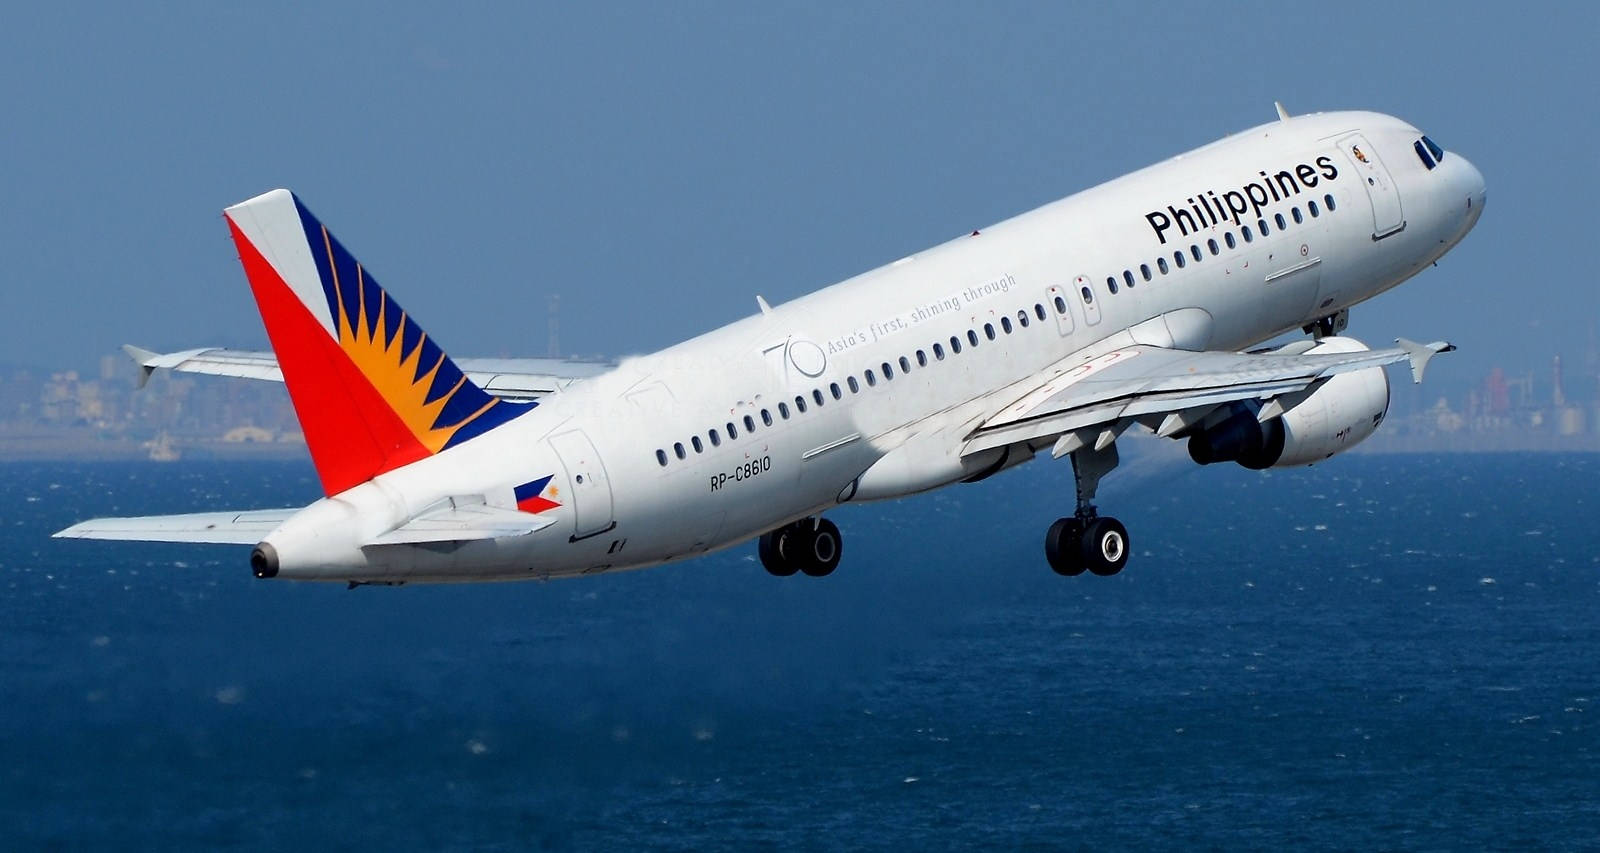 Philippineairlines Flyger Över Havet - In The Context Of Computer Or Mobile Wallpaper, This Could Potentially Be A Great Scenic Wallpaper Featuring Philippine Airlines Flying Over The Sea. Wallpaper